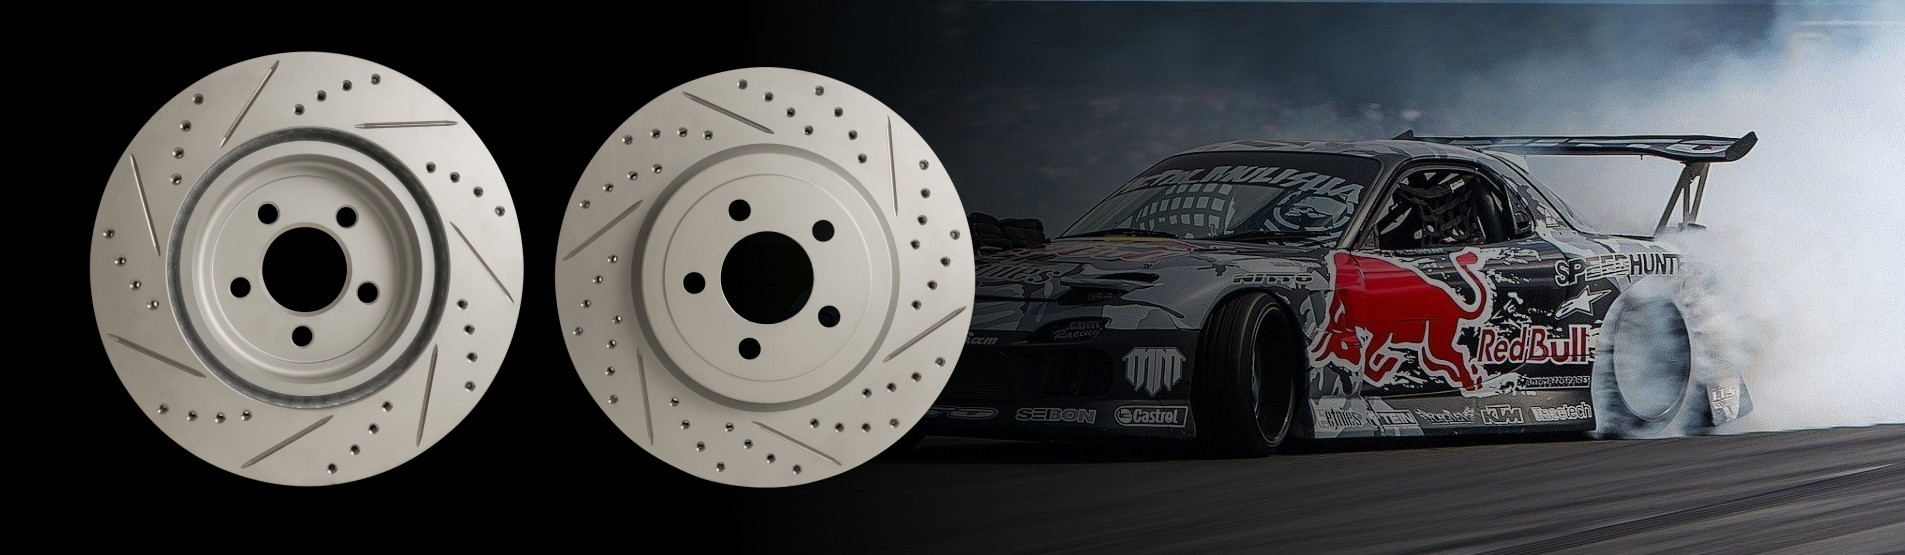 Drilled Slotted Rotors